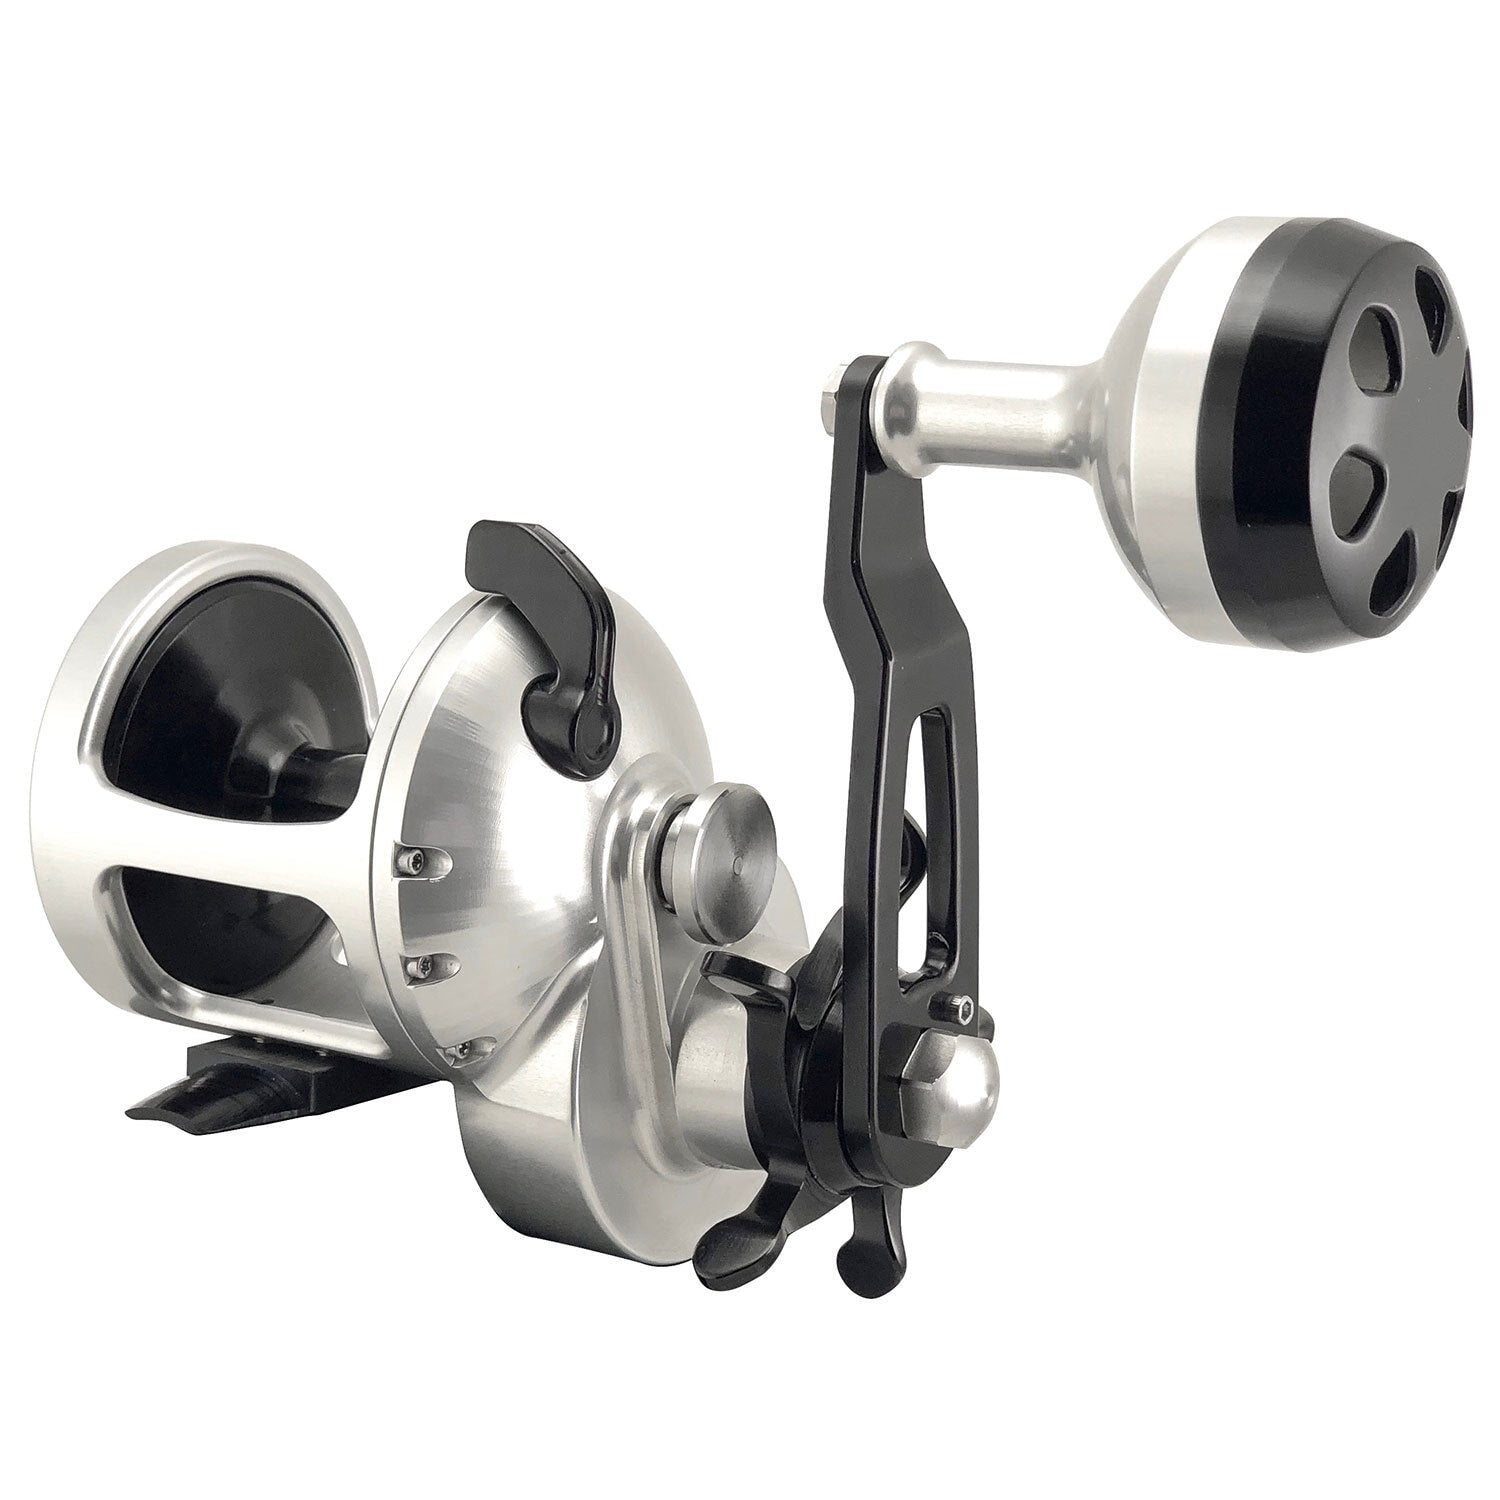 Accurate Tern Star Drag Conventional Reel